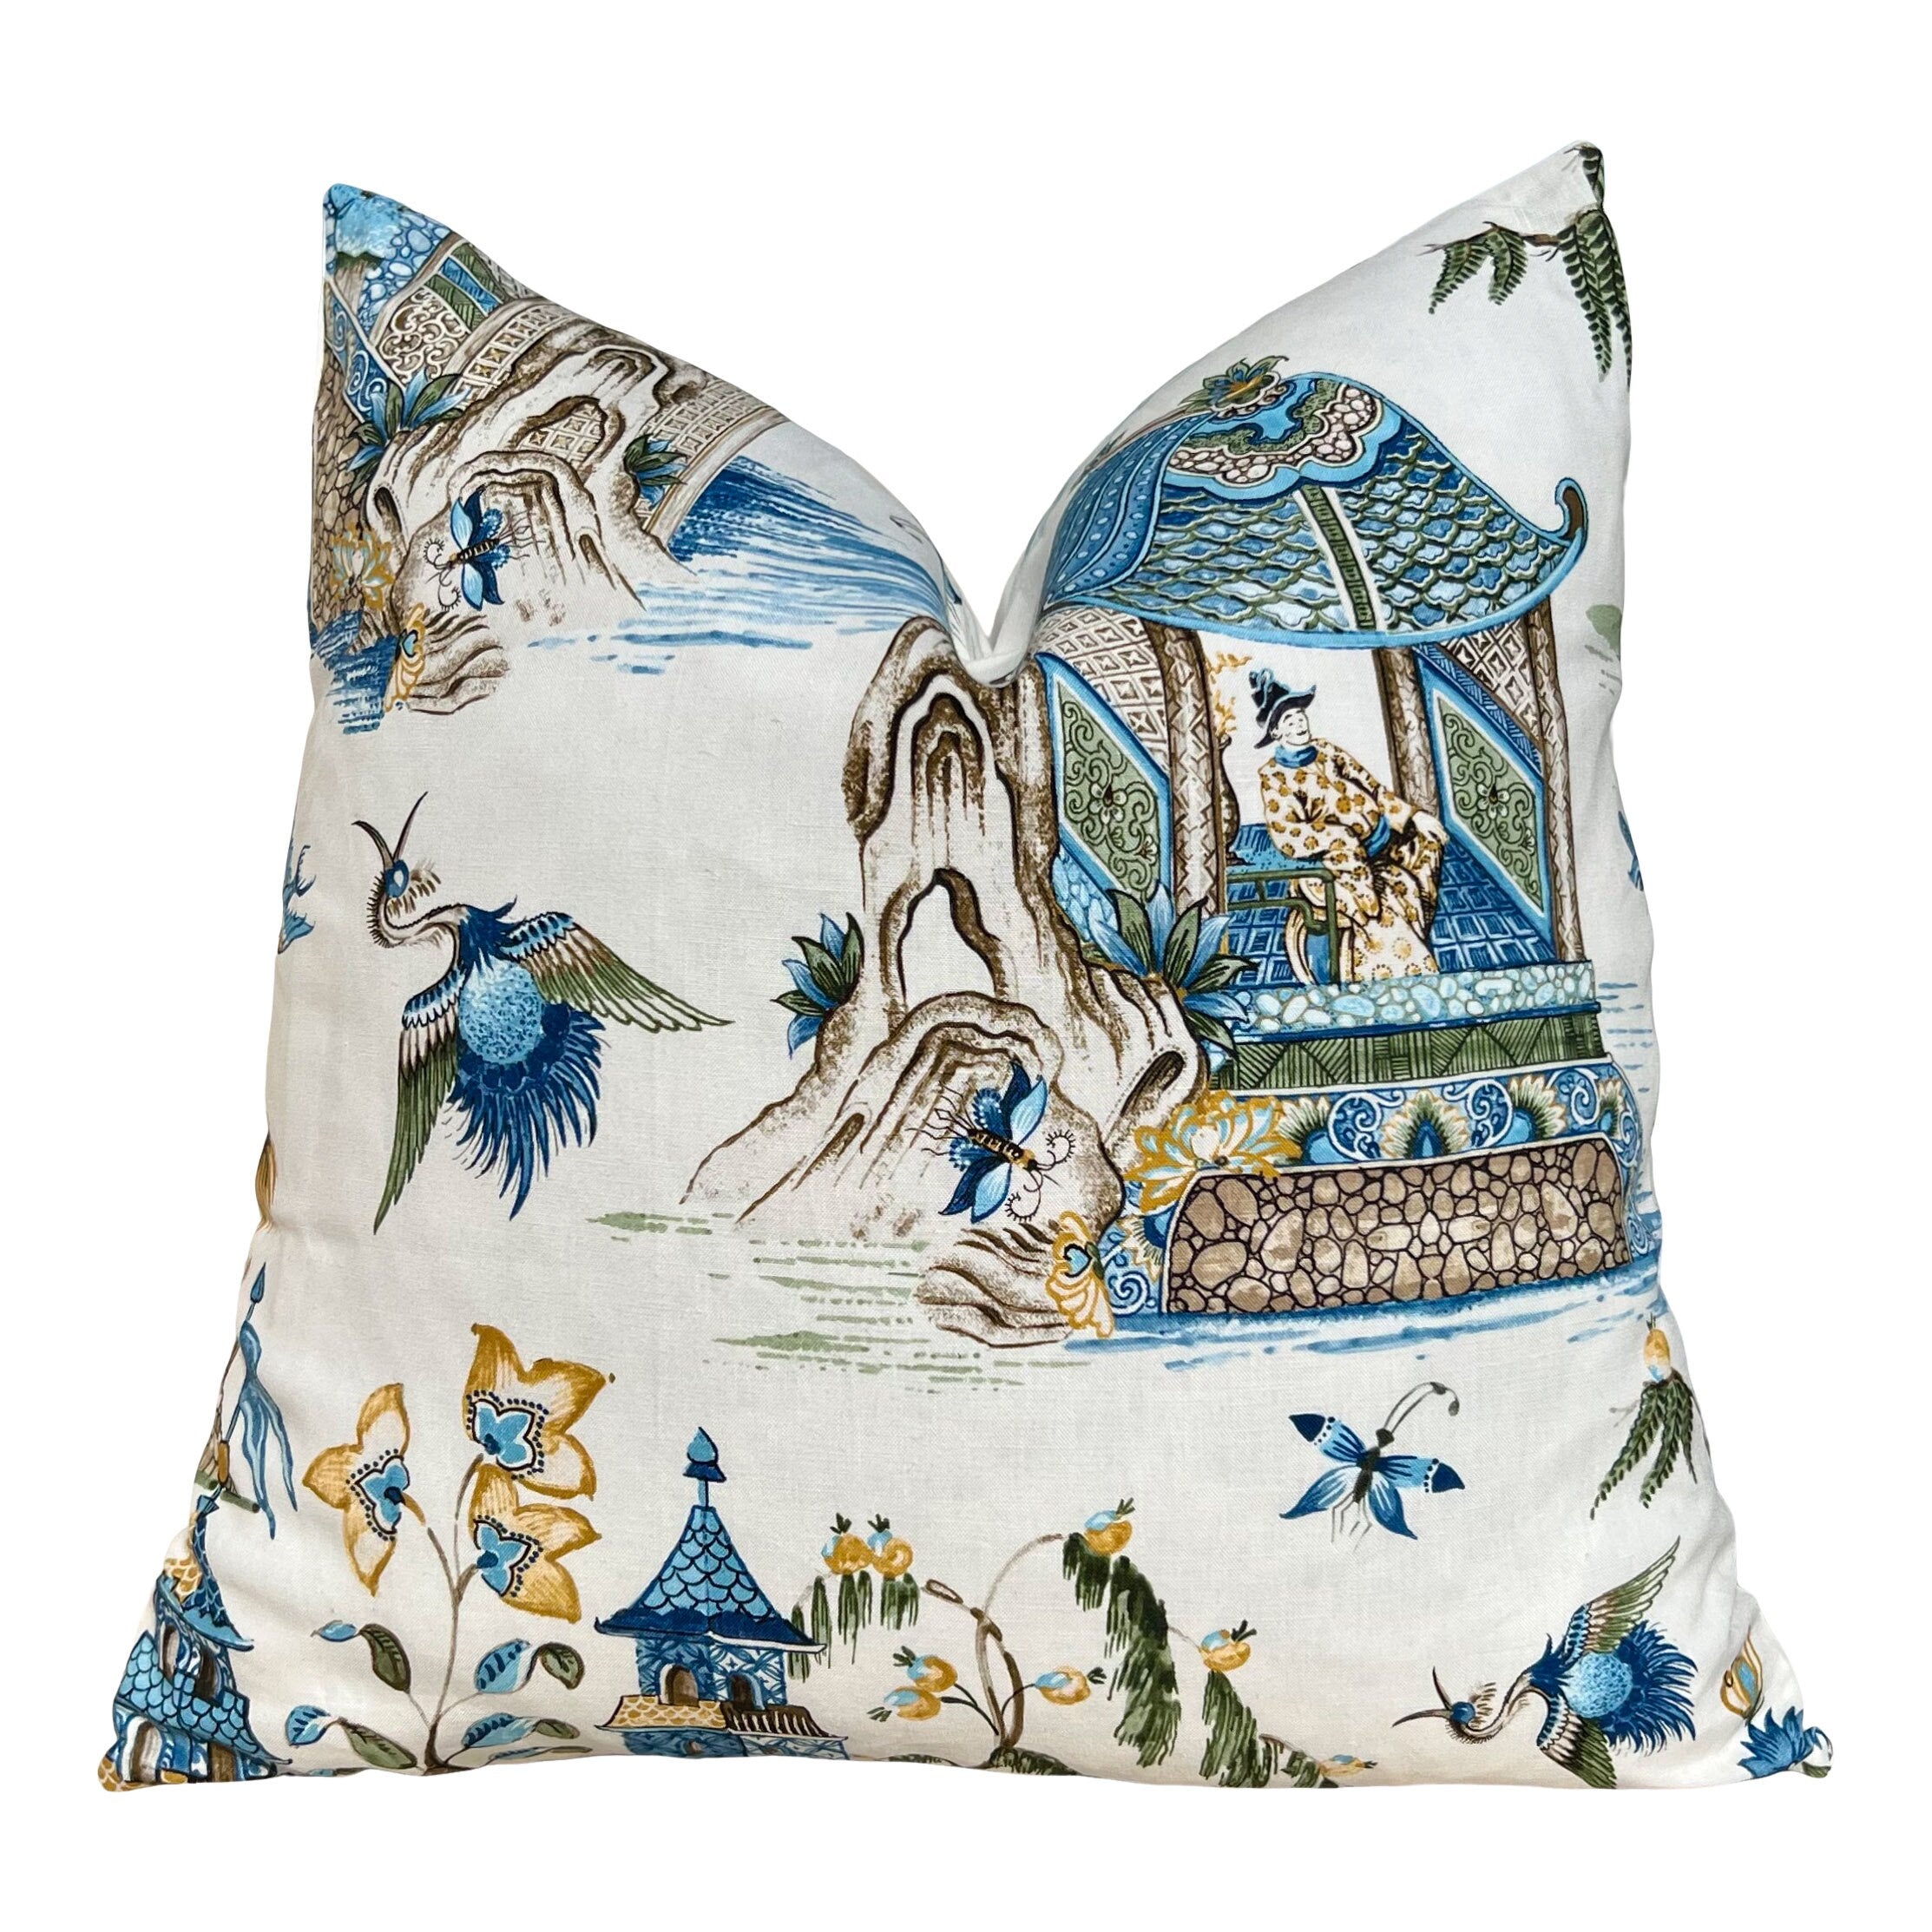 Grand Palace Chinoiserie Pillow in Green and Blue. Pagoda Pillow Cover, Designer Lumbar Pillows, High End Pillows, Euro Sham Pillow Cover